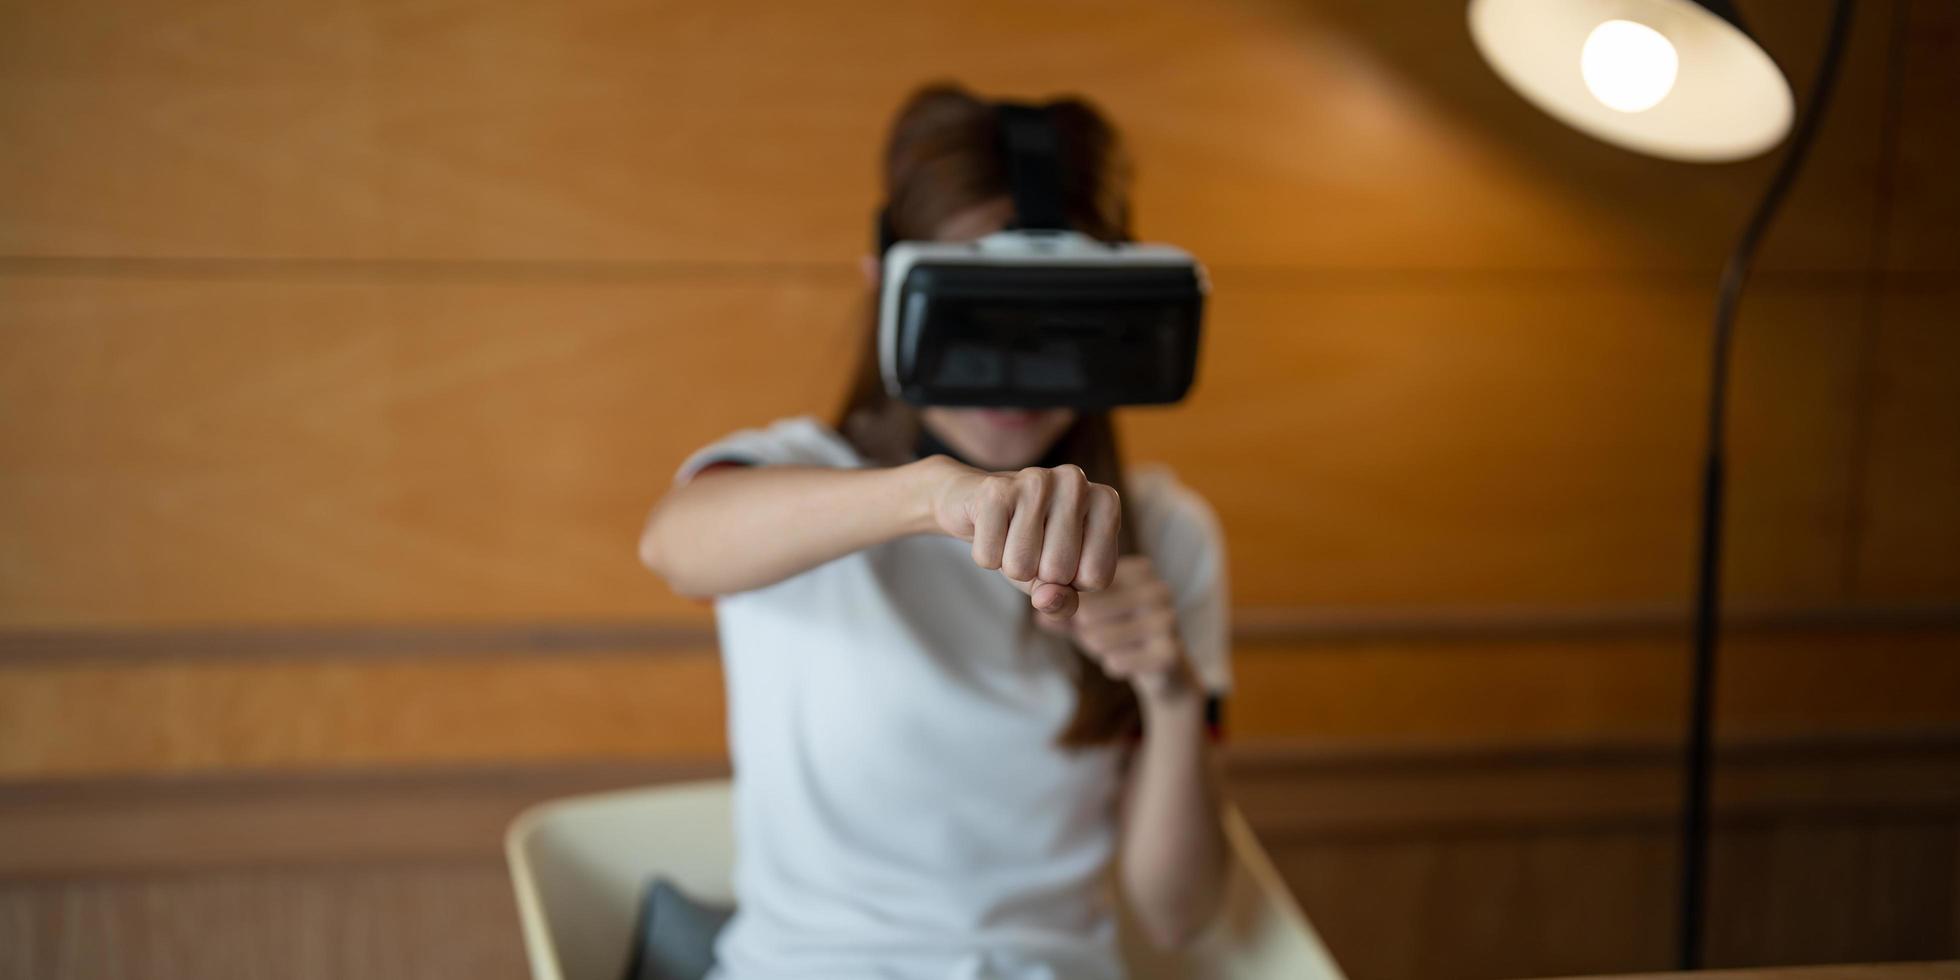 Girl wearing virtual reality glasses on head playing fighting game, holding clenched fists up ready to boxing, experiencing cyberspace using VR headset technology photo